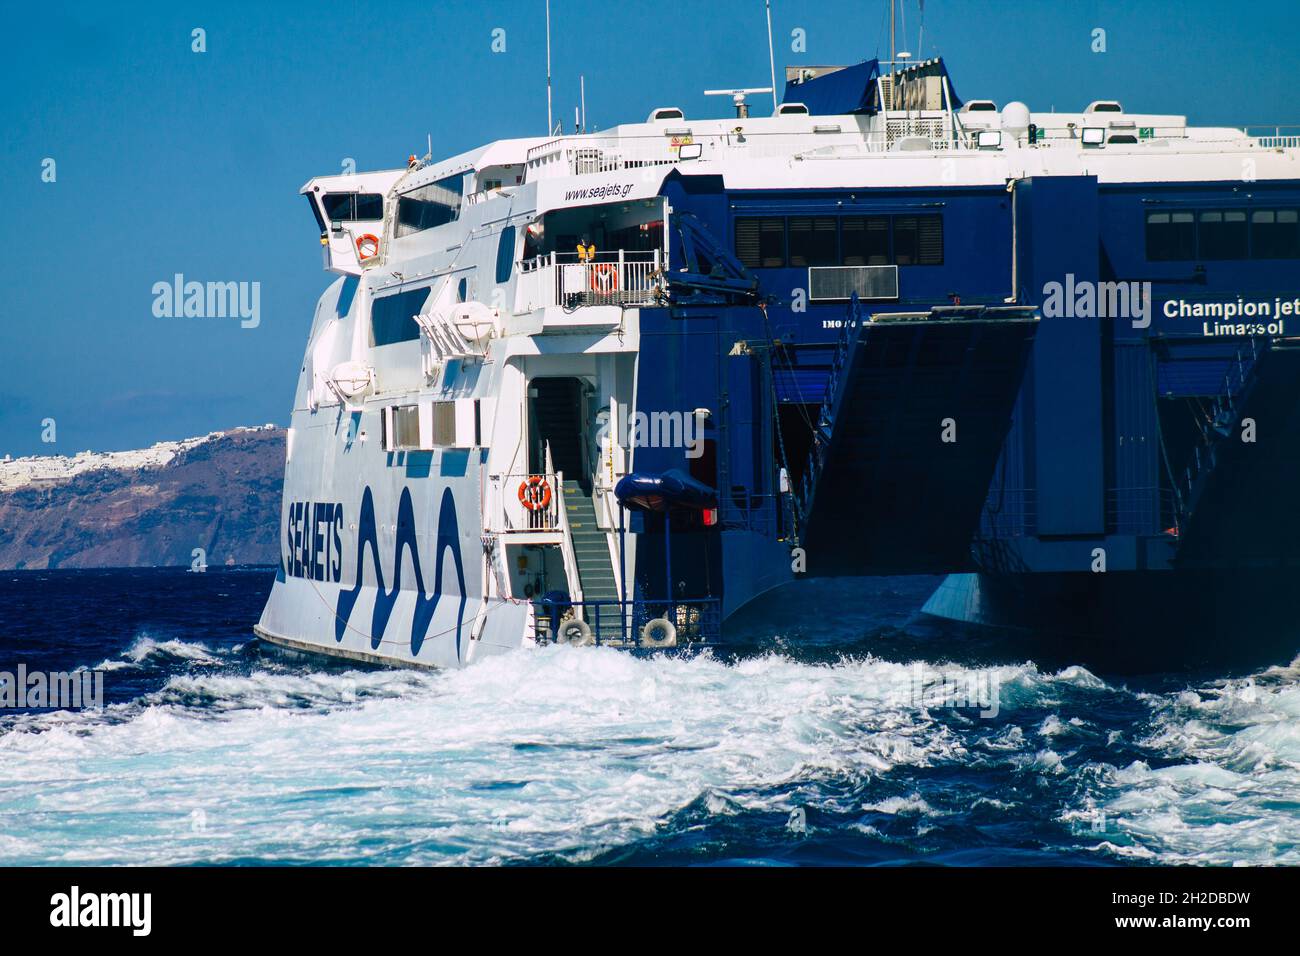 Santorini, Greece - October 20, 2021 The high speed boats of Seajets are  ferries that make this crossing over about 5 hours from the port of Piraeus  Stock Photo - Alamy